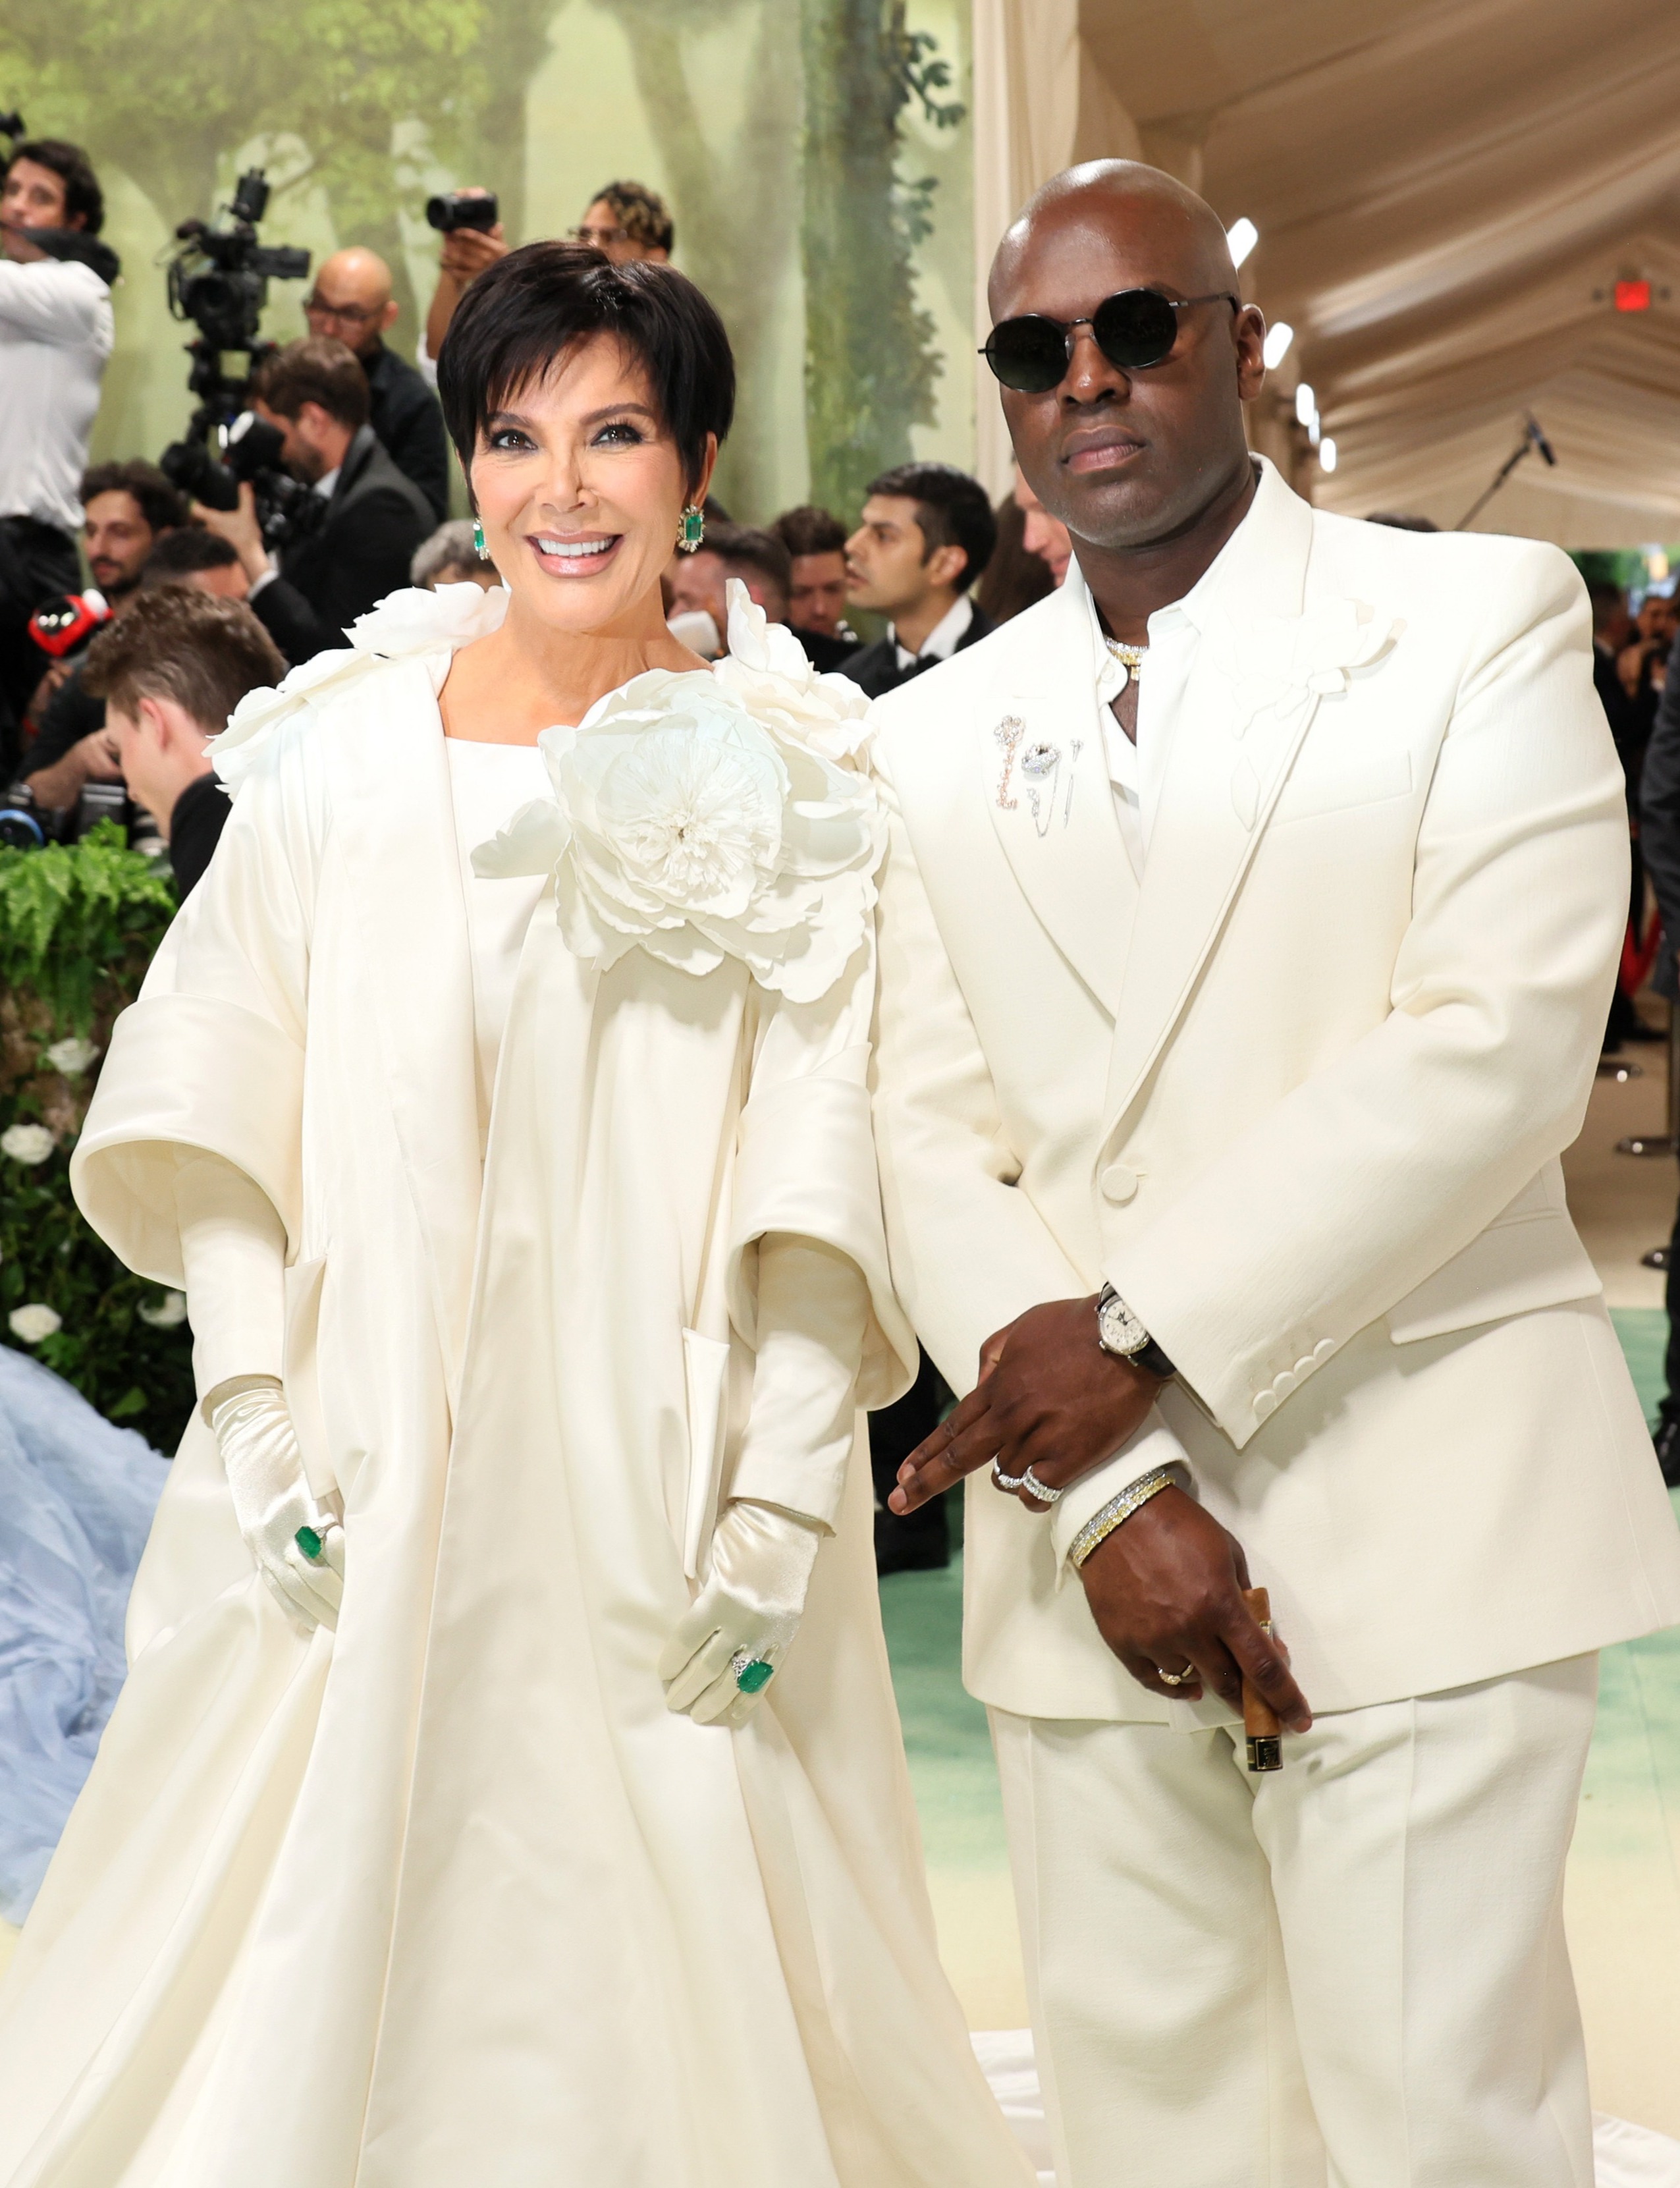 Kris Jenner pictured with her longtime boyfriend Corey Gamble